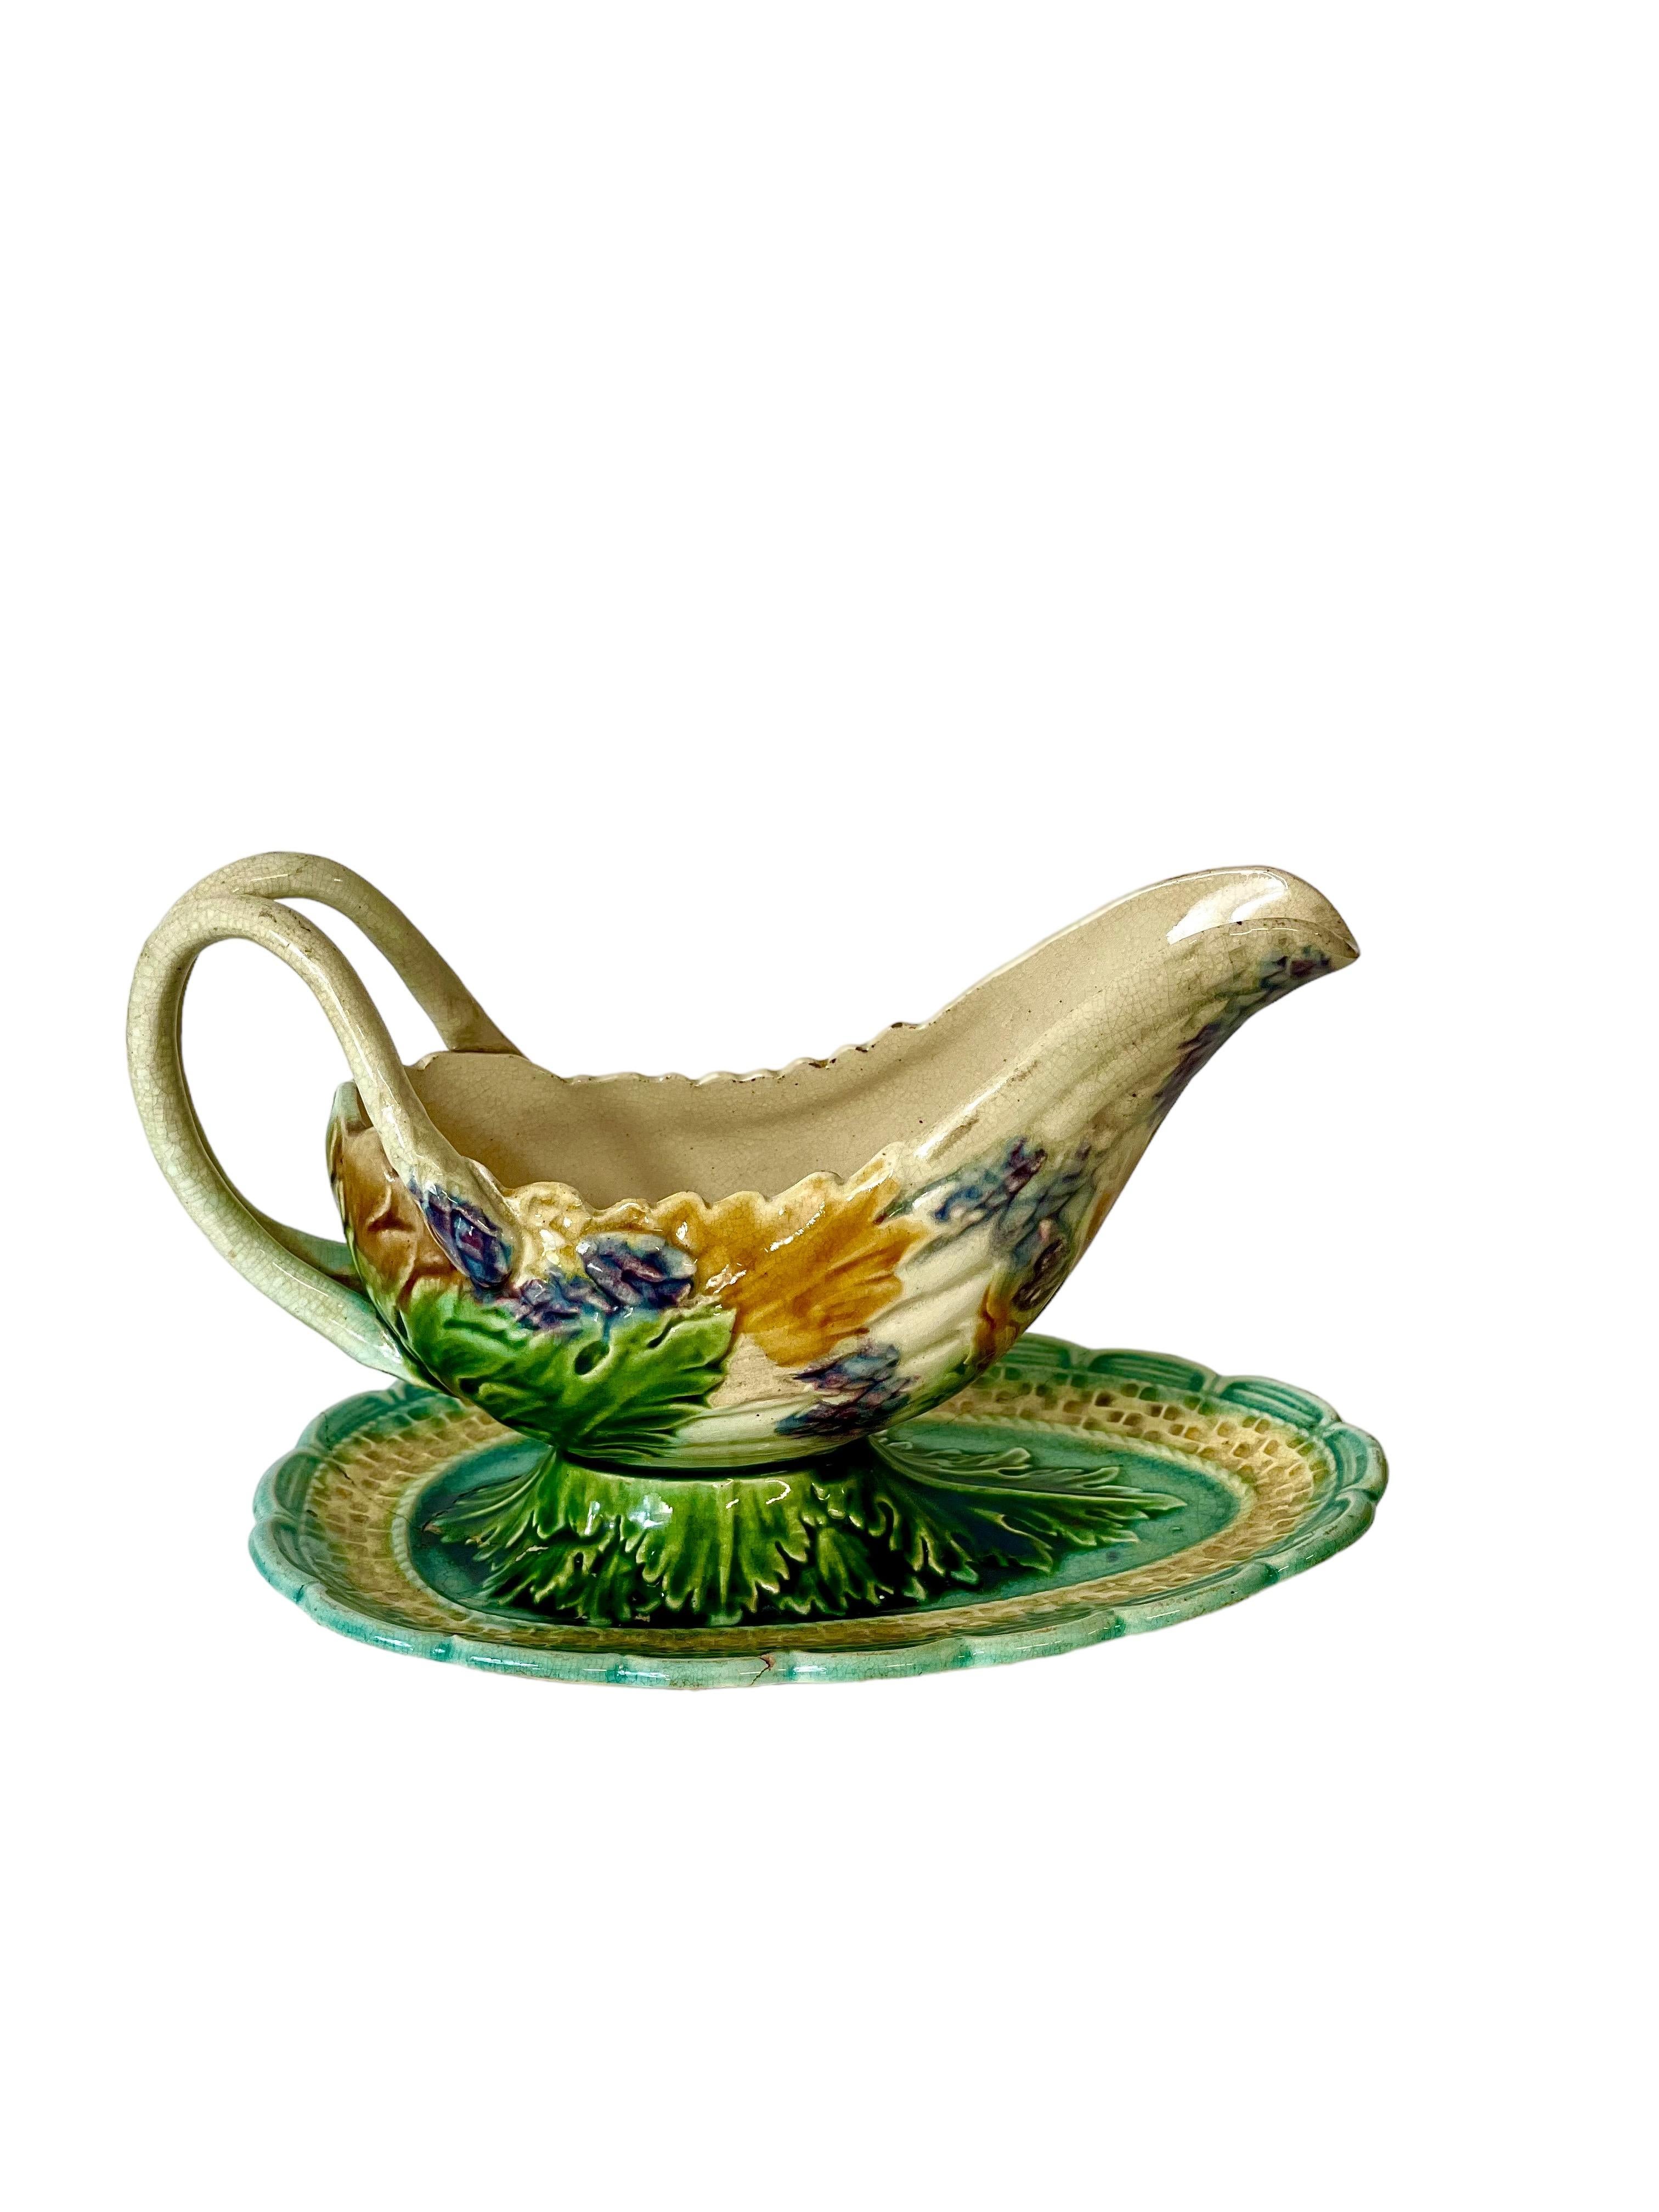 An interesting and unusual French Majolica barbotine asparagus 'Saucière' on a shaped, attached stand. The body of the 'boat' is formed from a bunch of purple-tipped asparagus spears, swathed in green and mustard yellow leaves, while two delicately